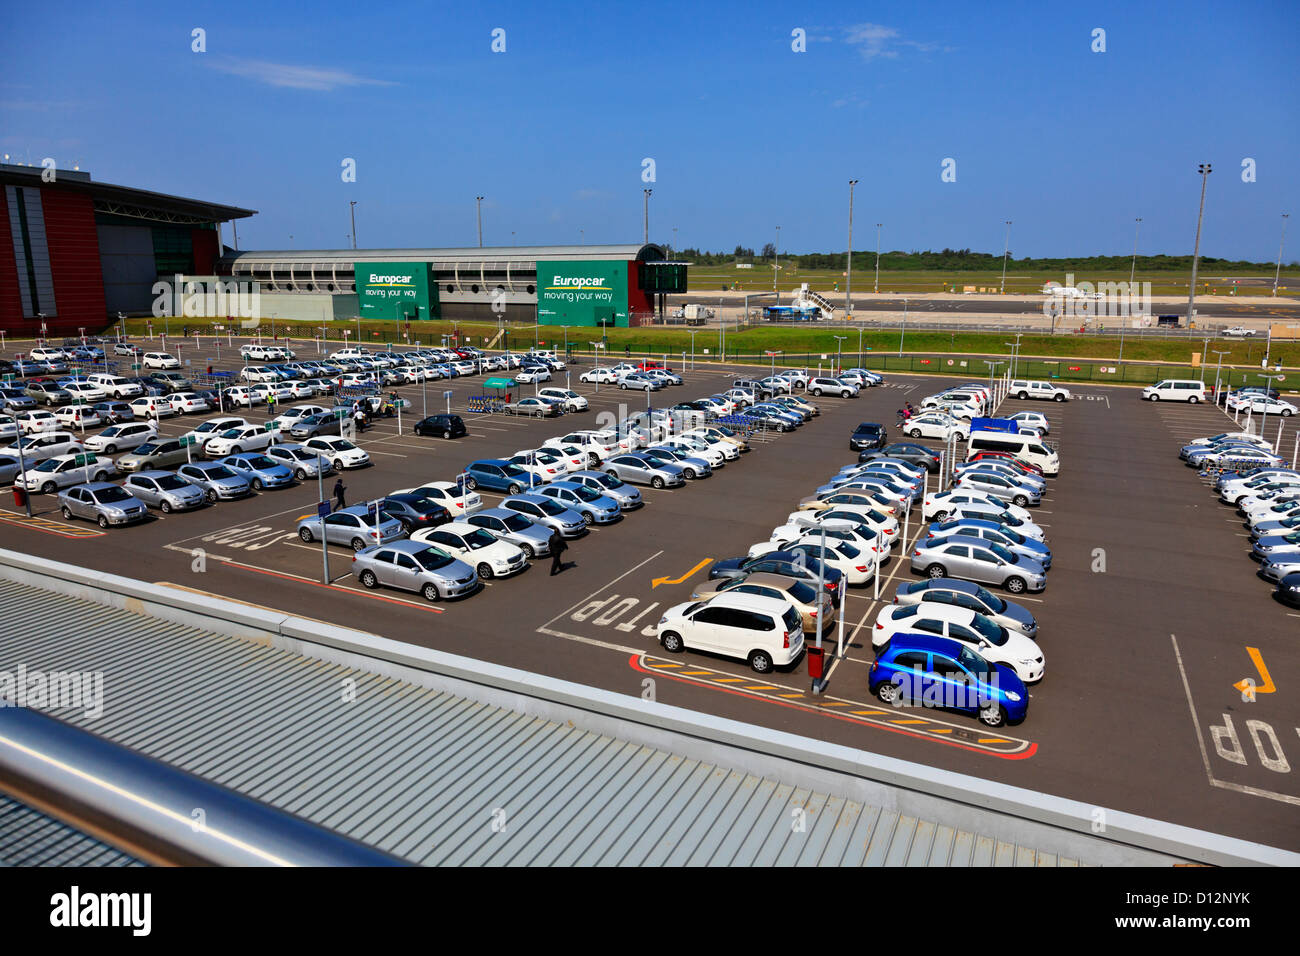 A parking area for the car rental firm Europcar at the King Shaka airport in Durban South Africa Stock Photo